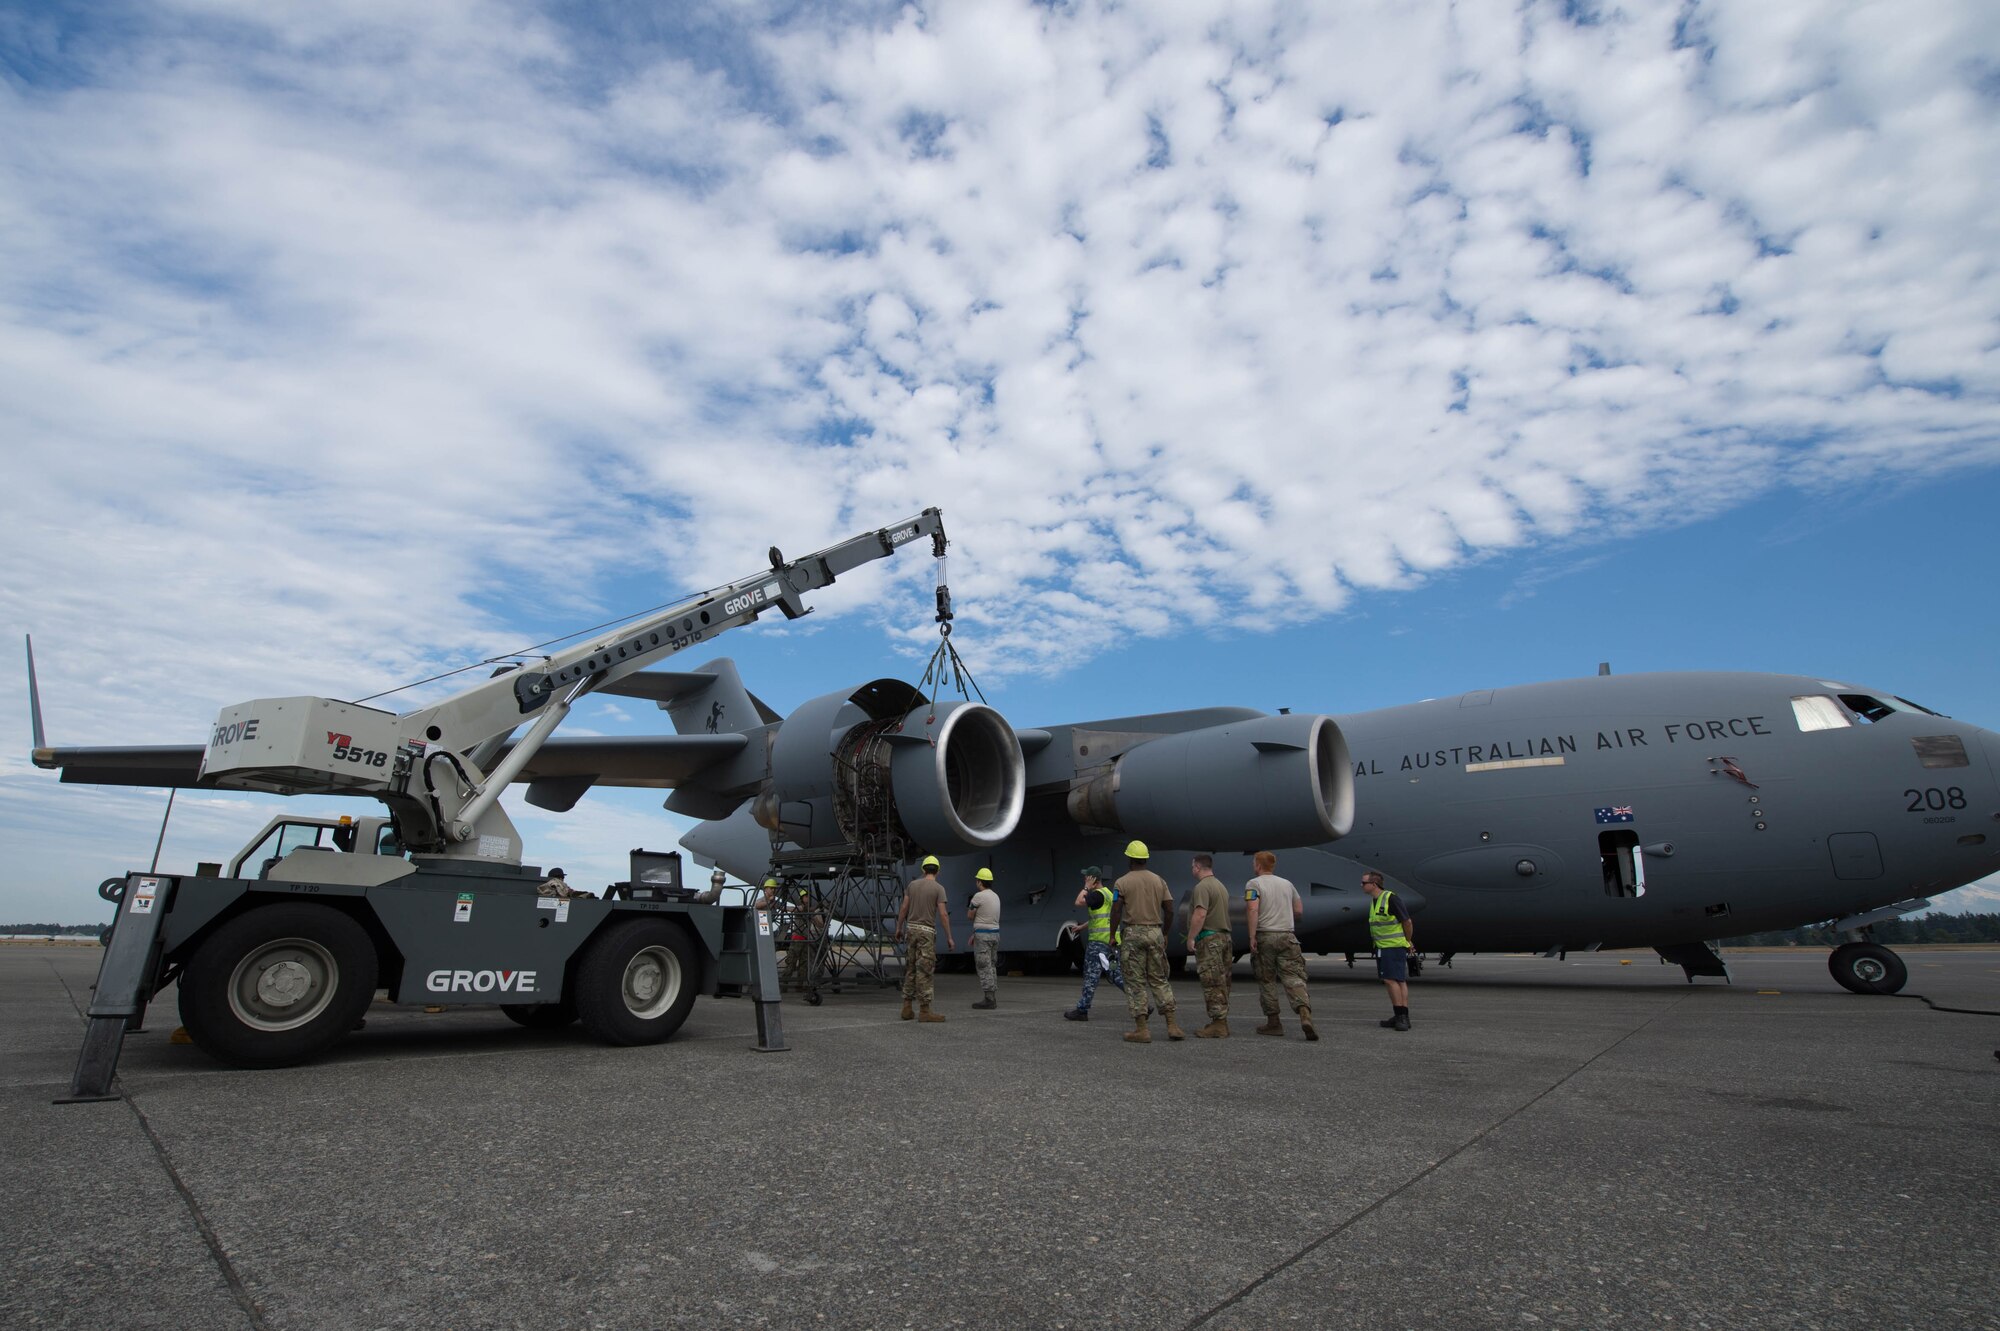 62nd Maintenance Squadron Airmen and Royal Australian Air Force Airmen work together to replace an engine ring cowl on an RAAF C-17 Globemaster III at Joint Base Lewis-McChord, Wash., Sept. 5, 2019.